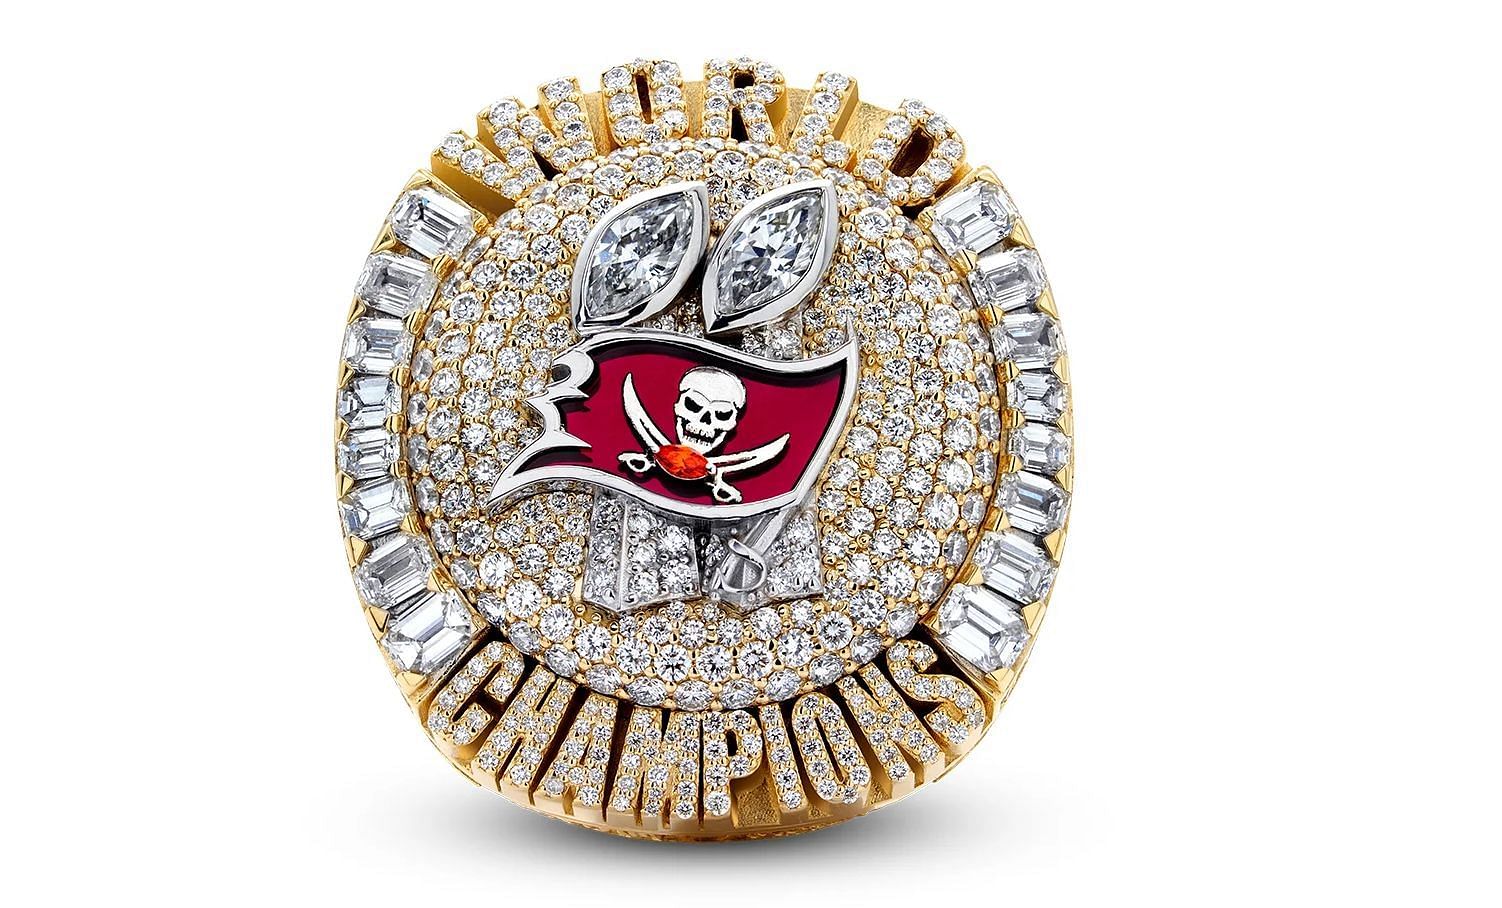 Tampa Bay Buccaneers Playoff History